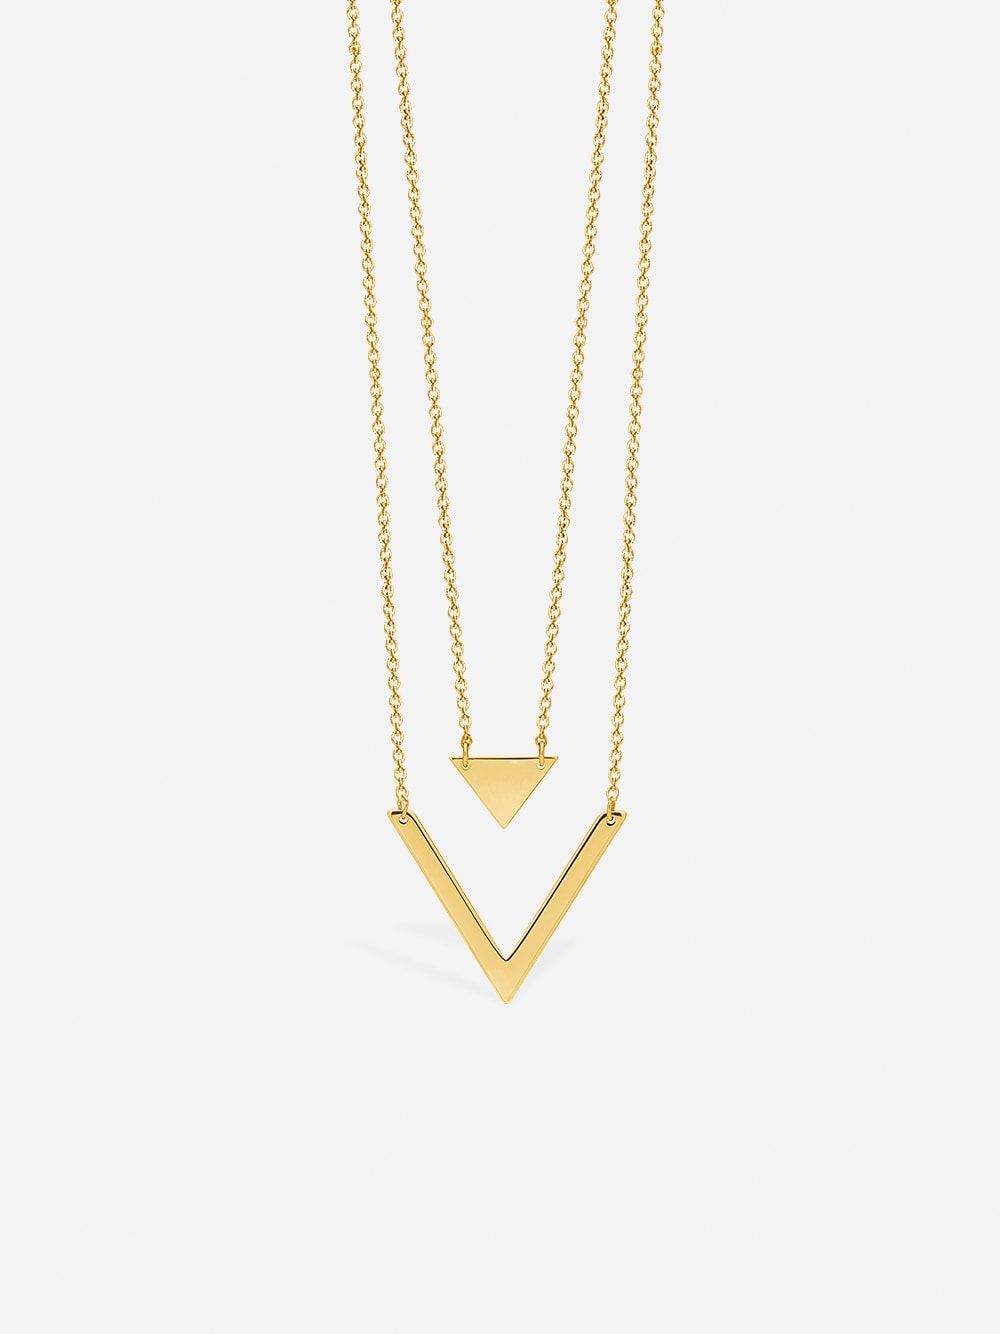 Golden Necklace Geometric Double Triangle | Coquine Jewelry 